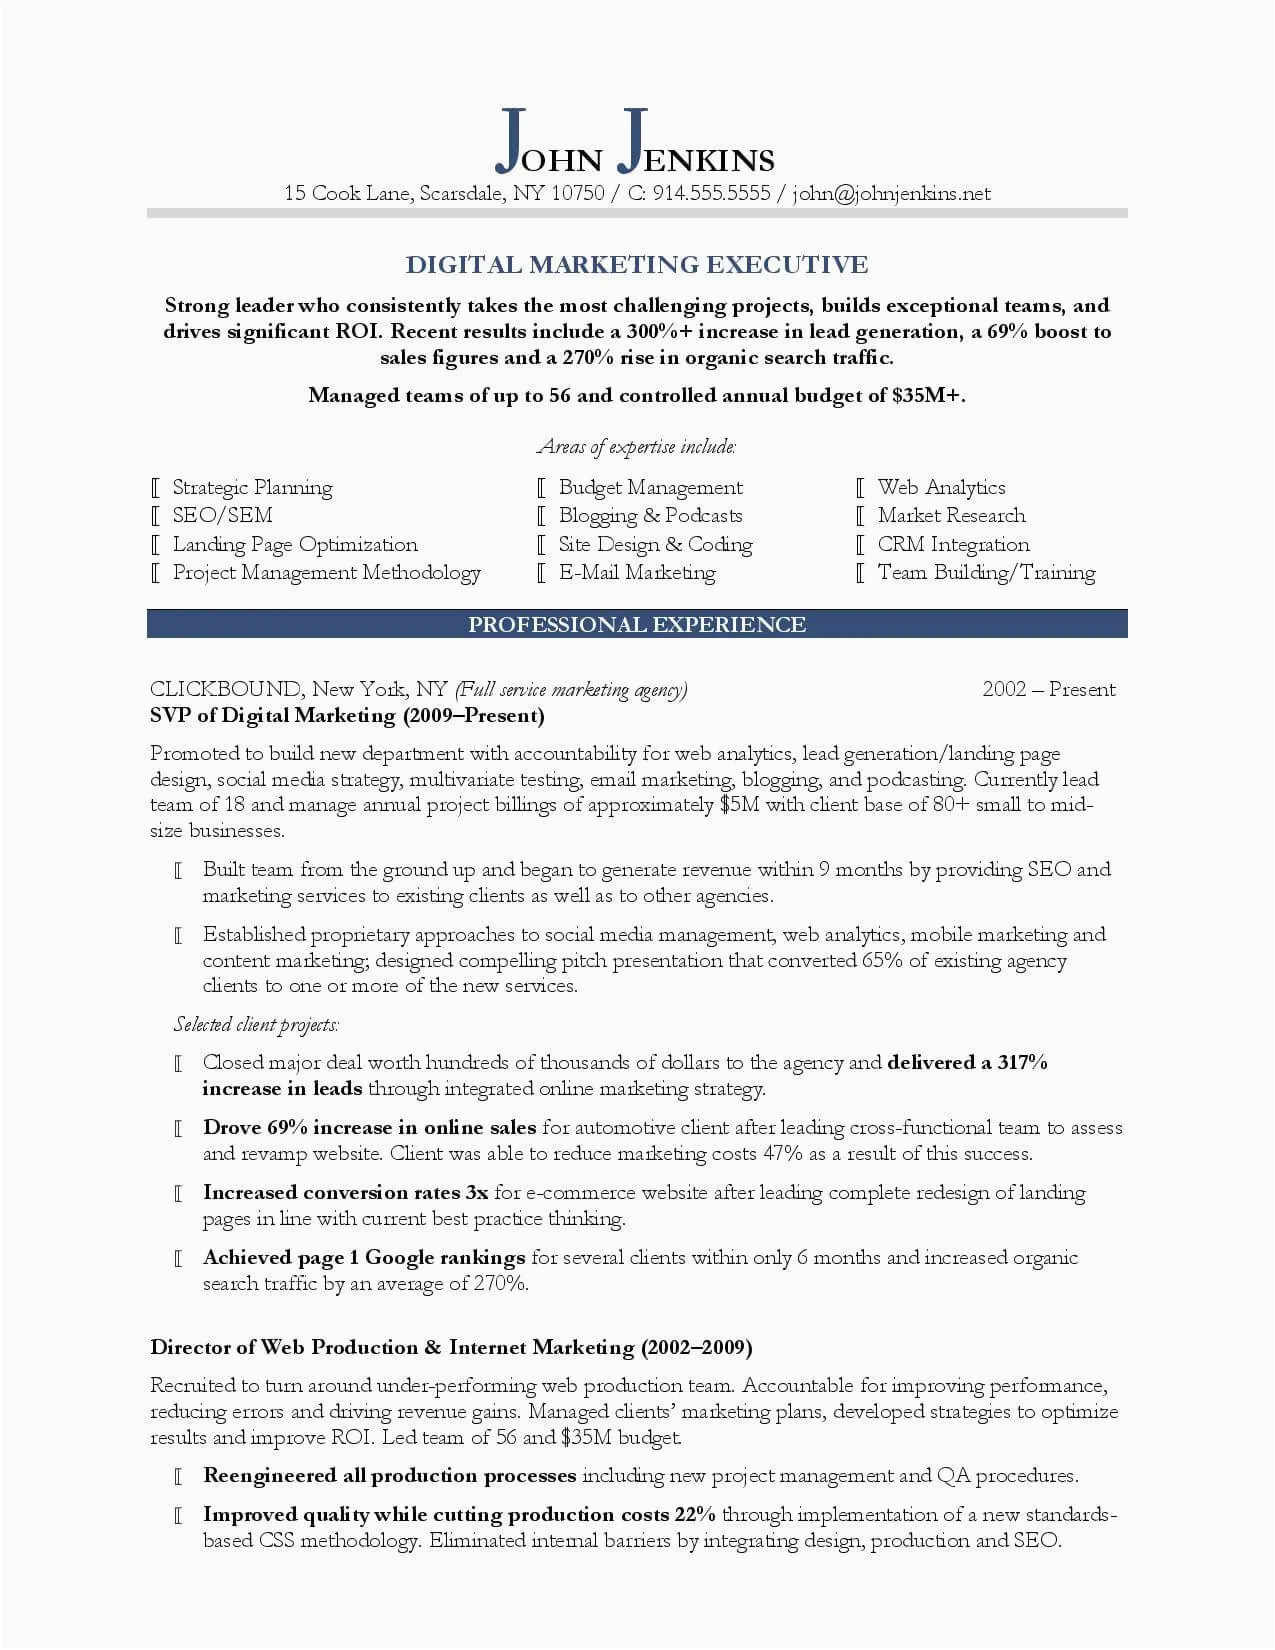 Sample Marketing Statement for Your Resume 10 Marketing Resume Samples Hiring Managers Will Notice